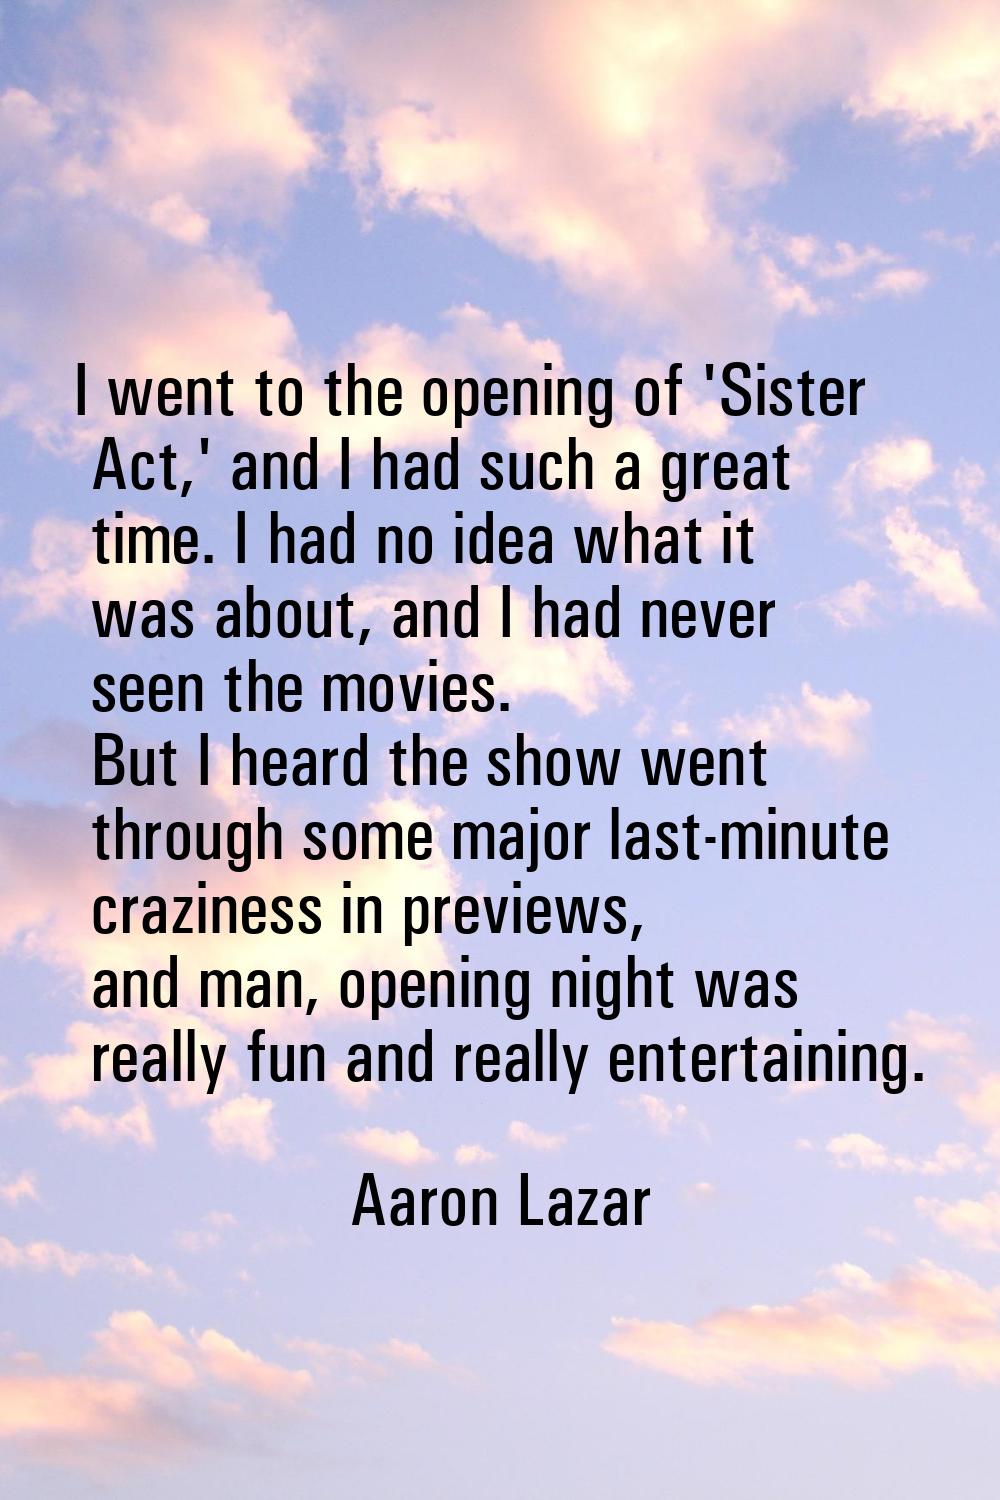 I went to the opening of 'Sister Act,' and I had such a great time. I had no idea what it was about